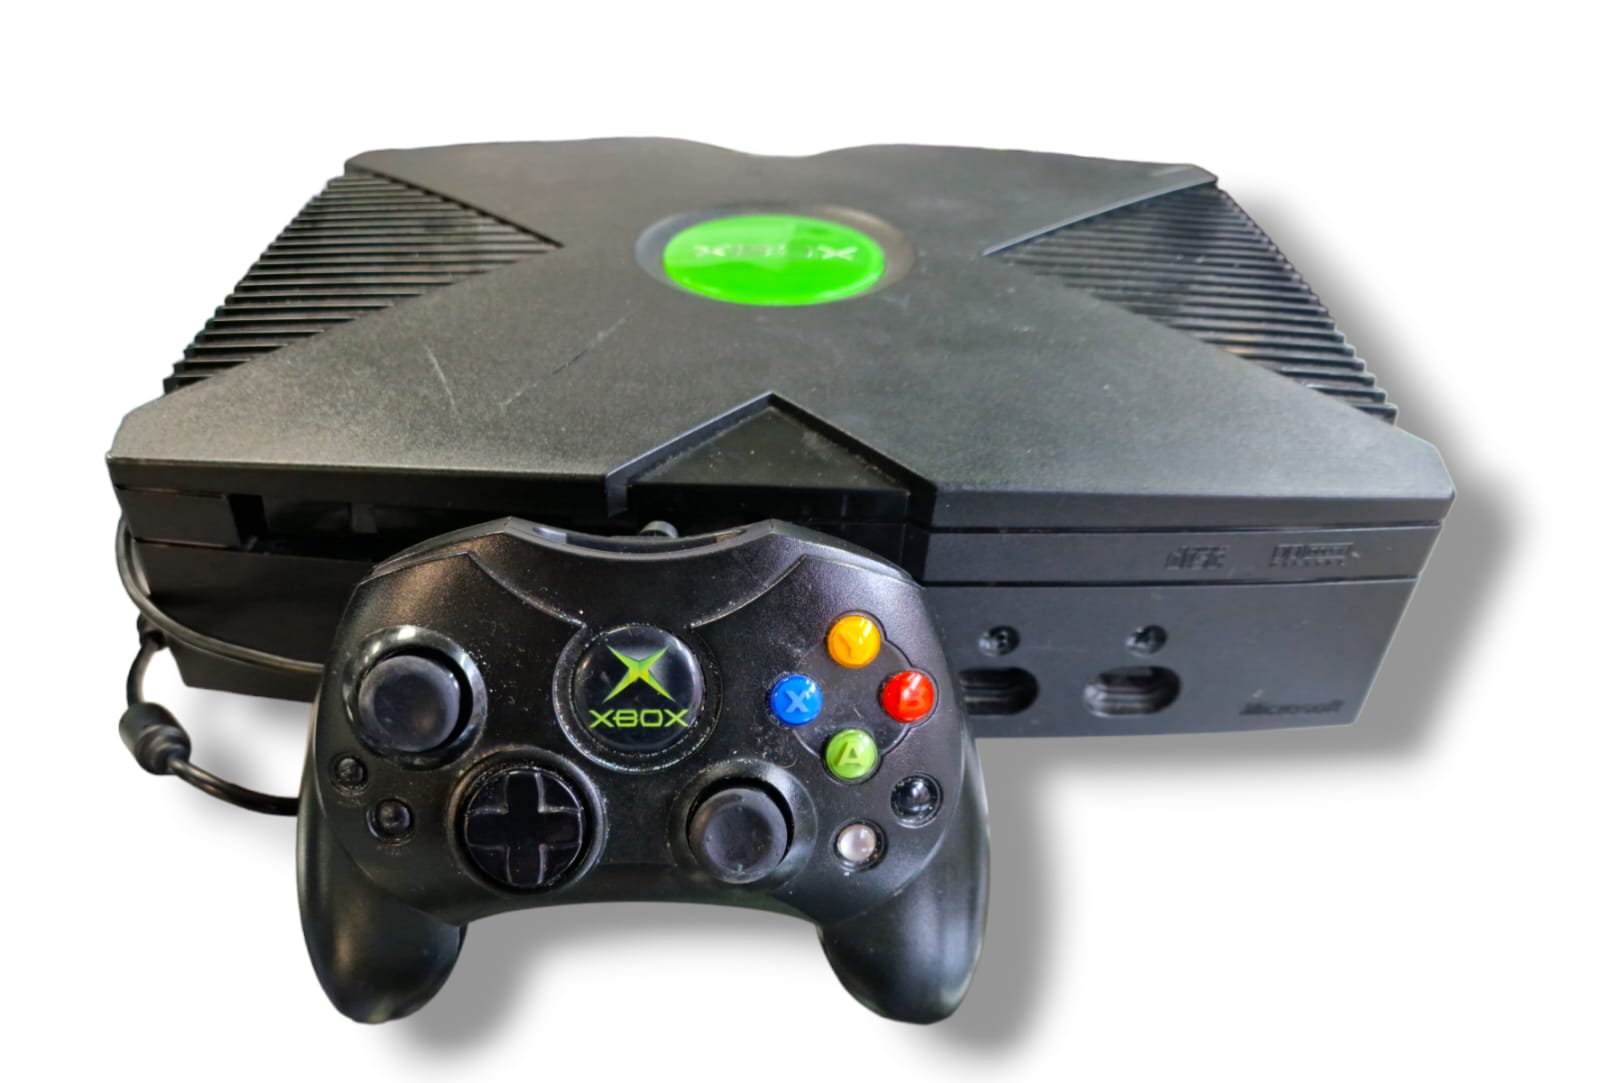 XBOX original console with smaller controller (disc drive faulty)